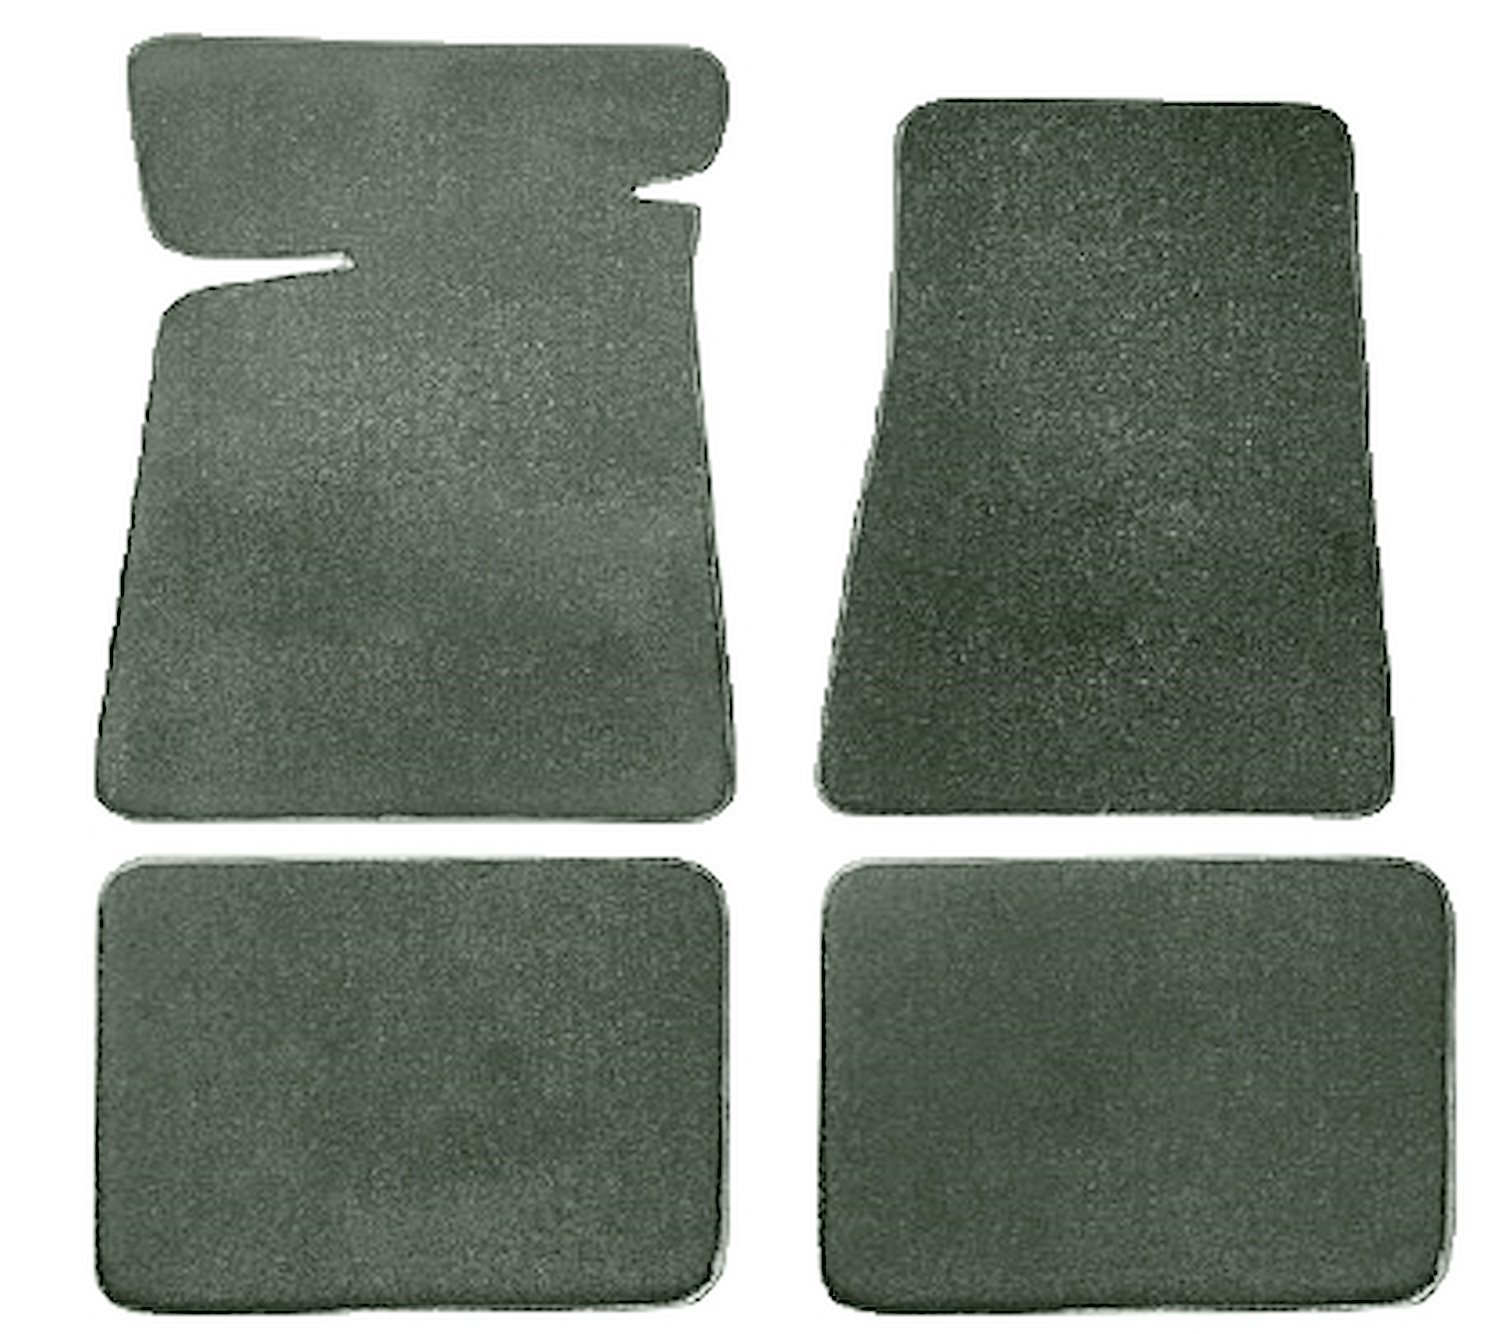 Molded Cut Pile Floor Mats for 1978-1981 Buick Regal, 1984-1987 Buick Regal Grand National [4-Piece, Dove Gray]